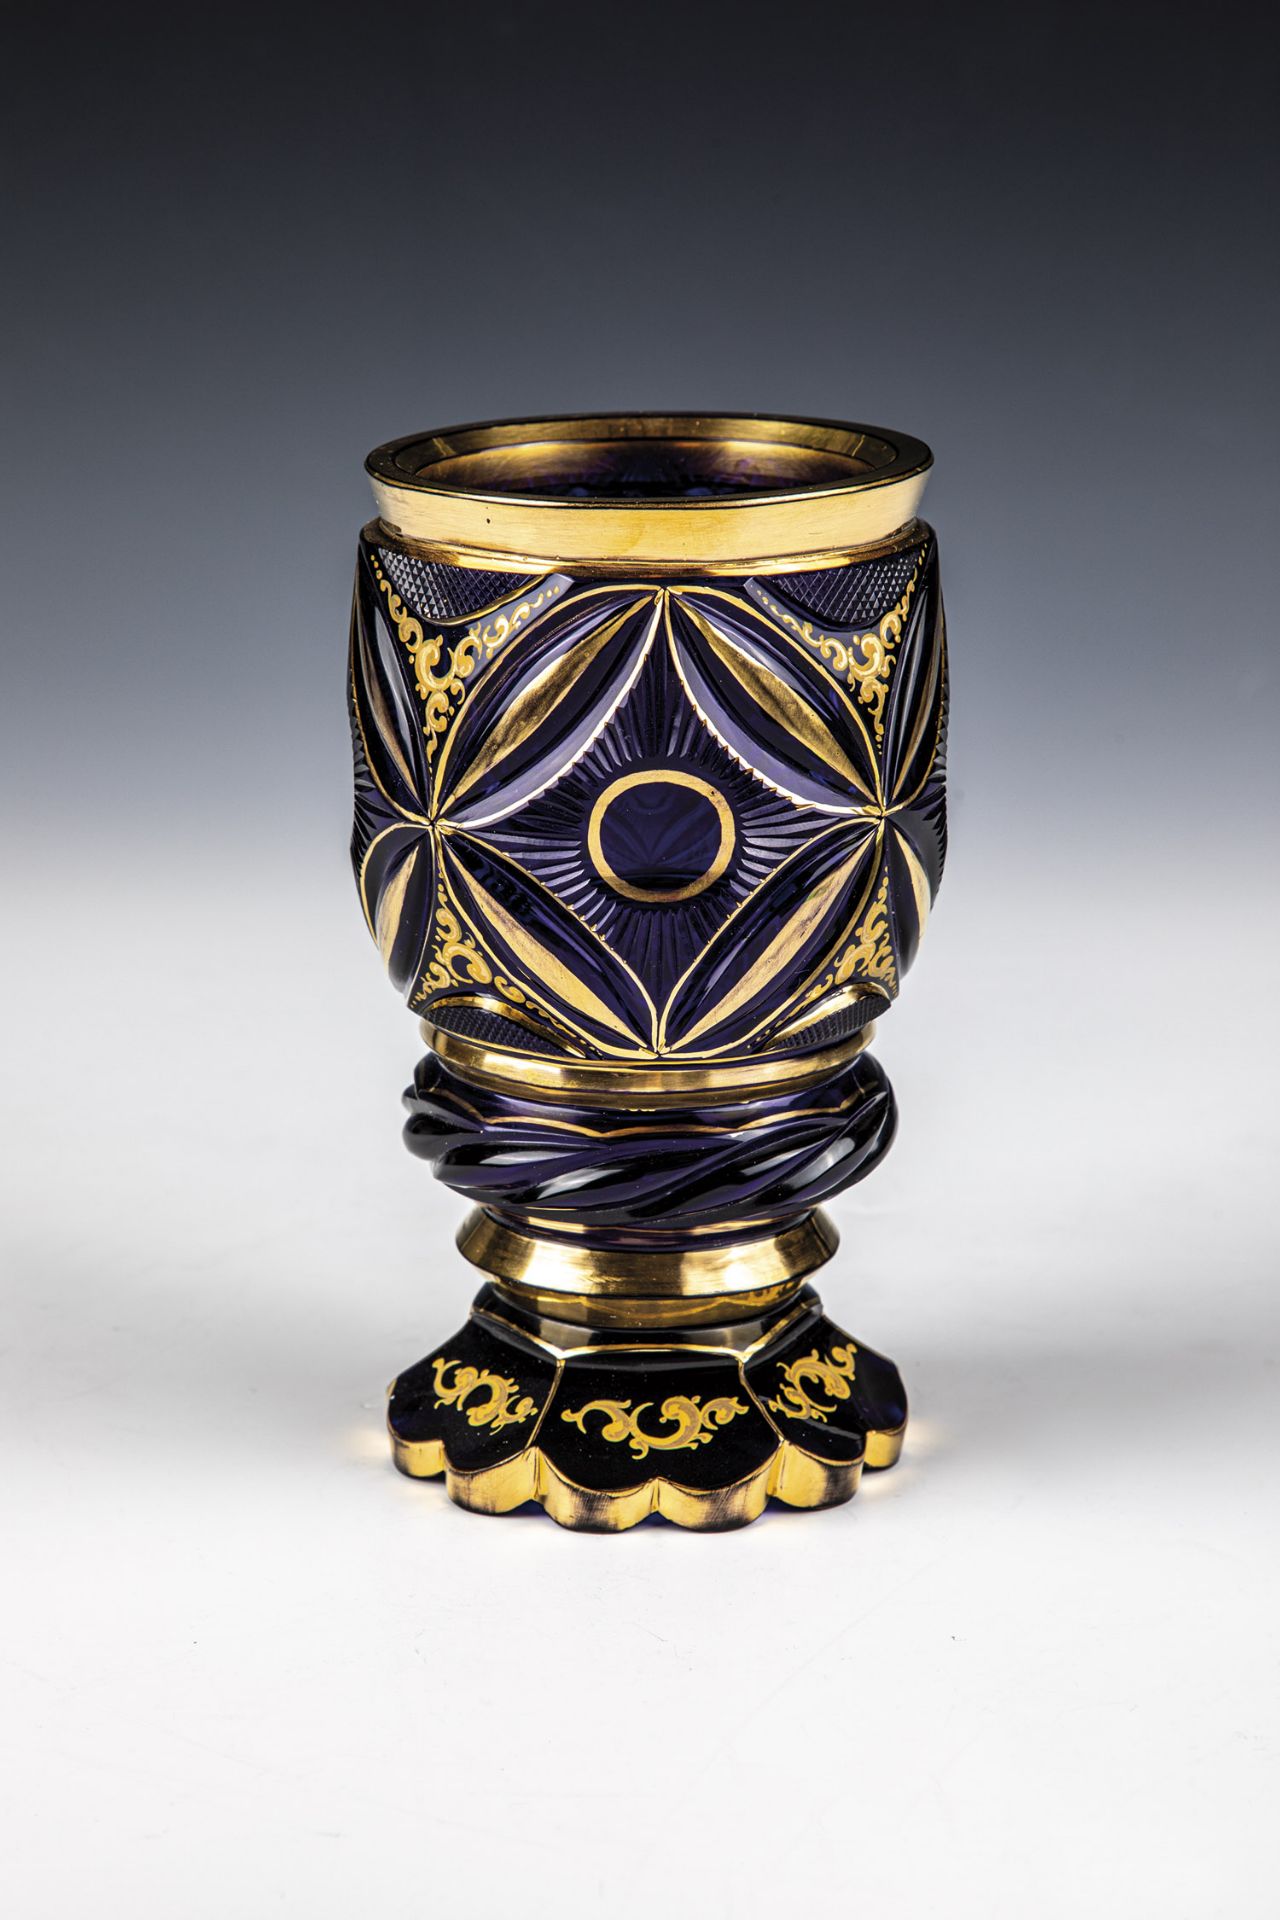 Foot cup Bohemia, E. 19th century Cobalt blue glass. Suitably cut foot, base of the variously cut